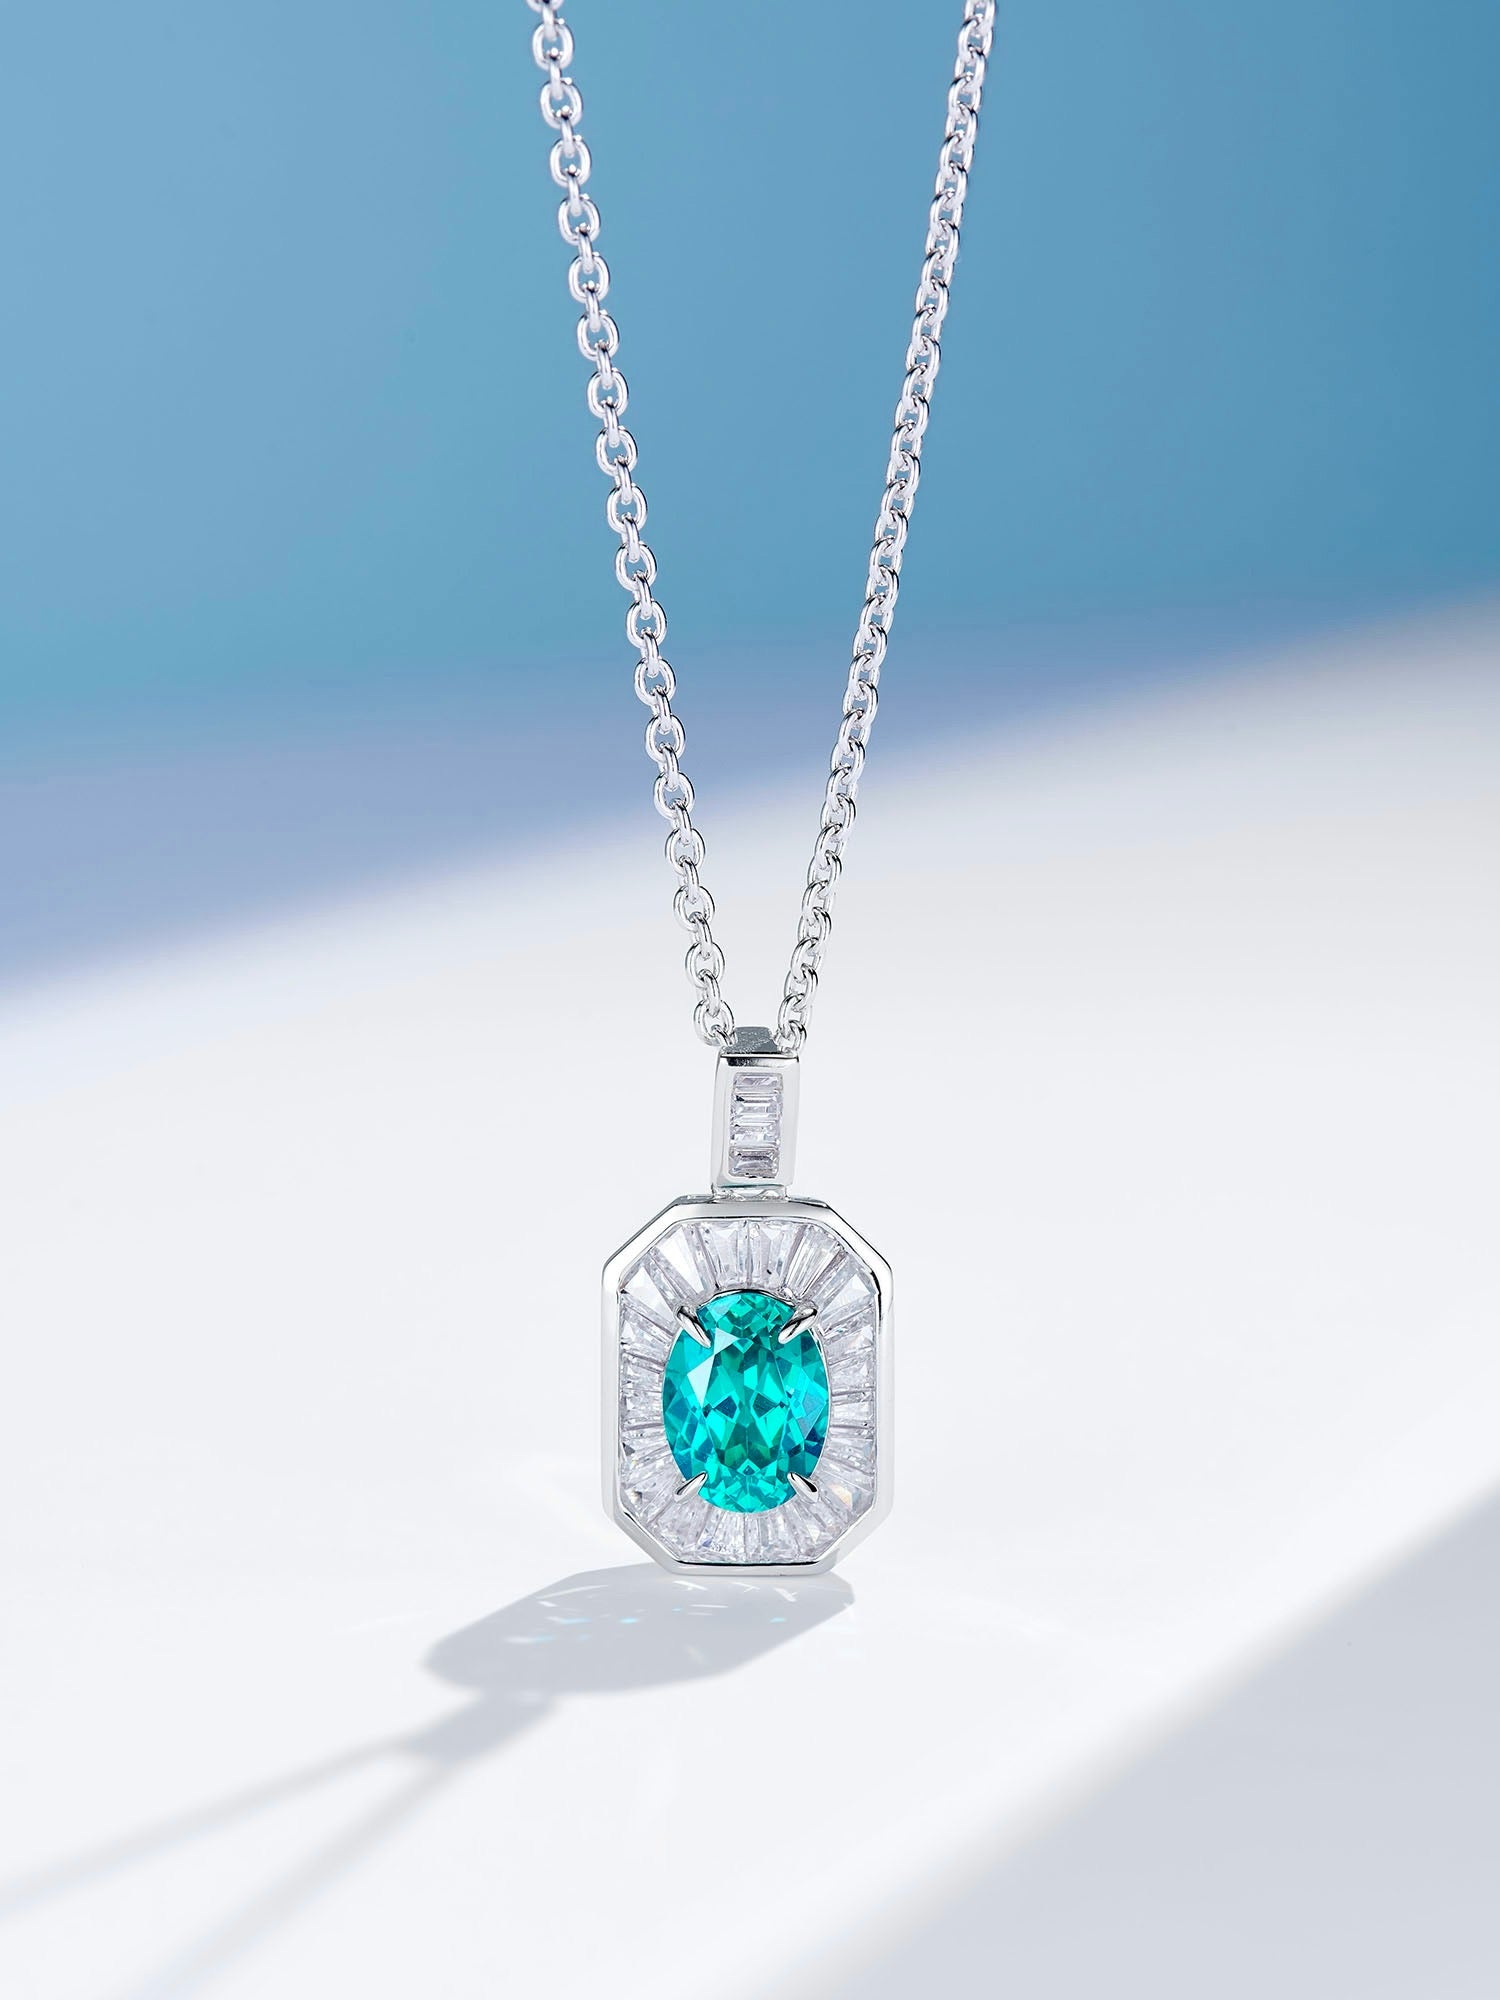 Radiant Teal Paraiba Tourmaline Pendant Necklace with Natural Zircon Accents